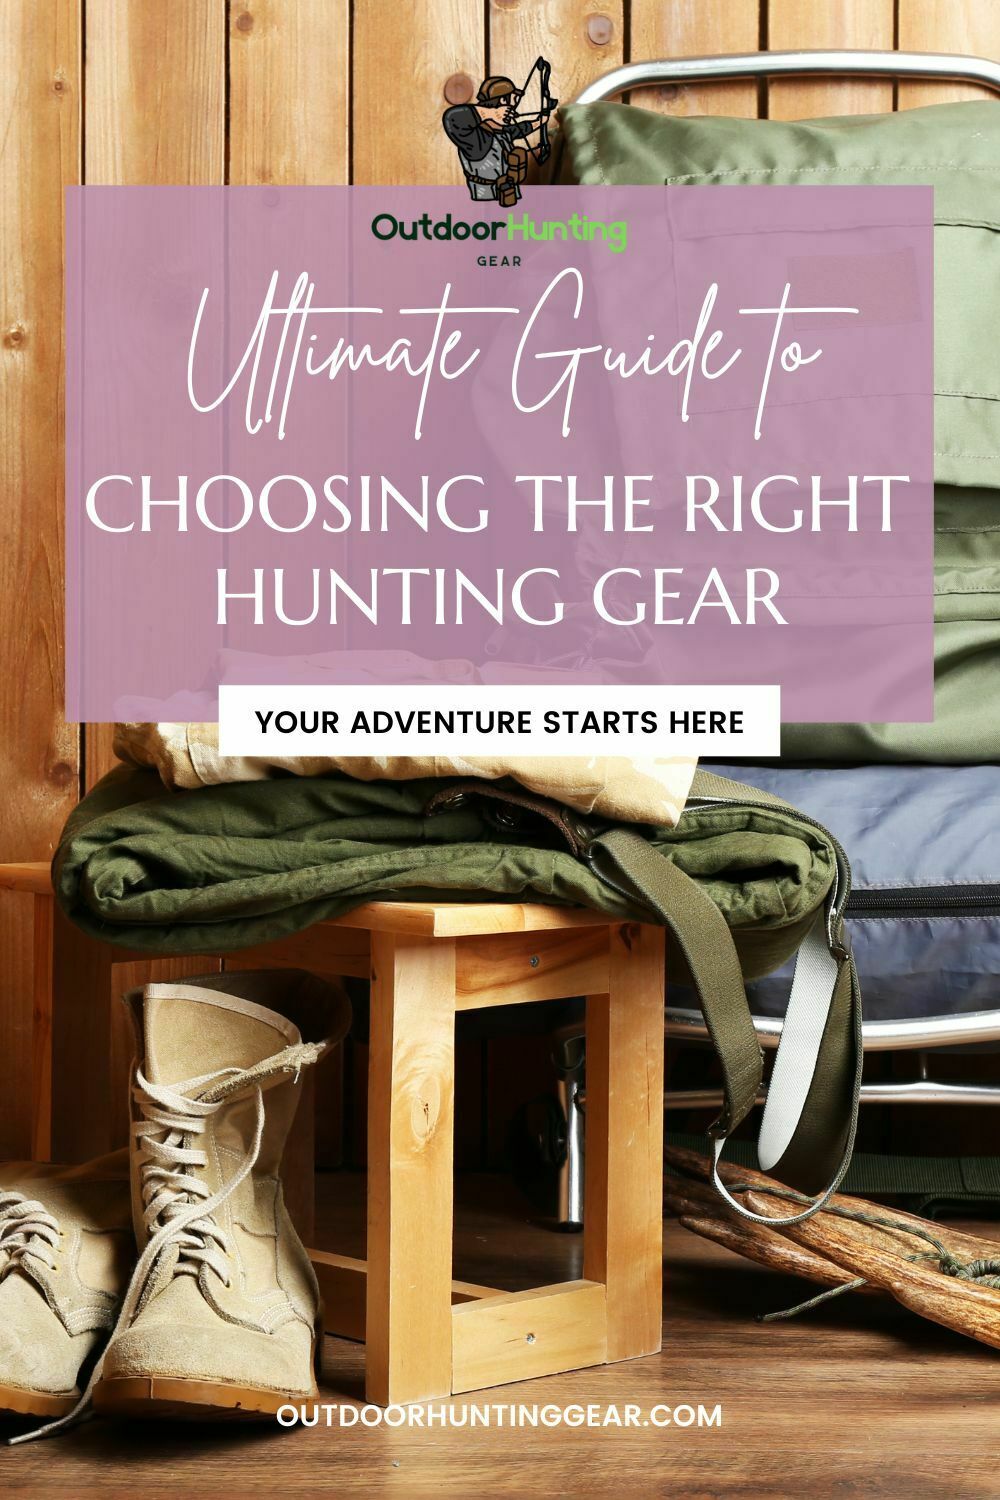 How to Choose the Right Hunting Gear: Tips for selecting the best hunting gear based on your needs.